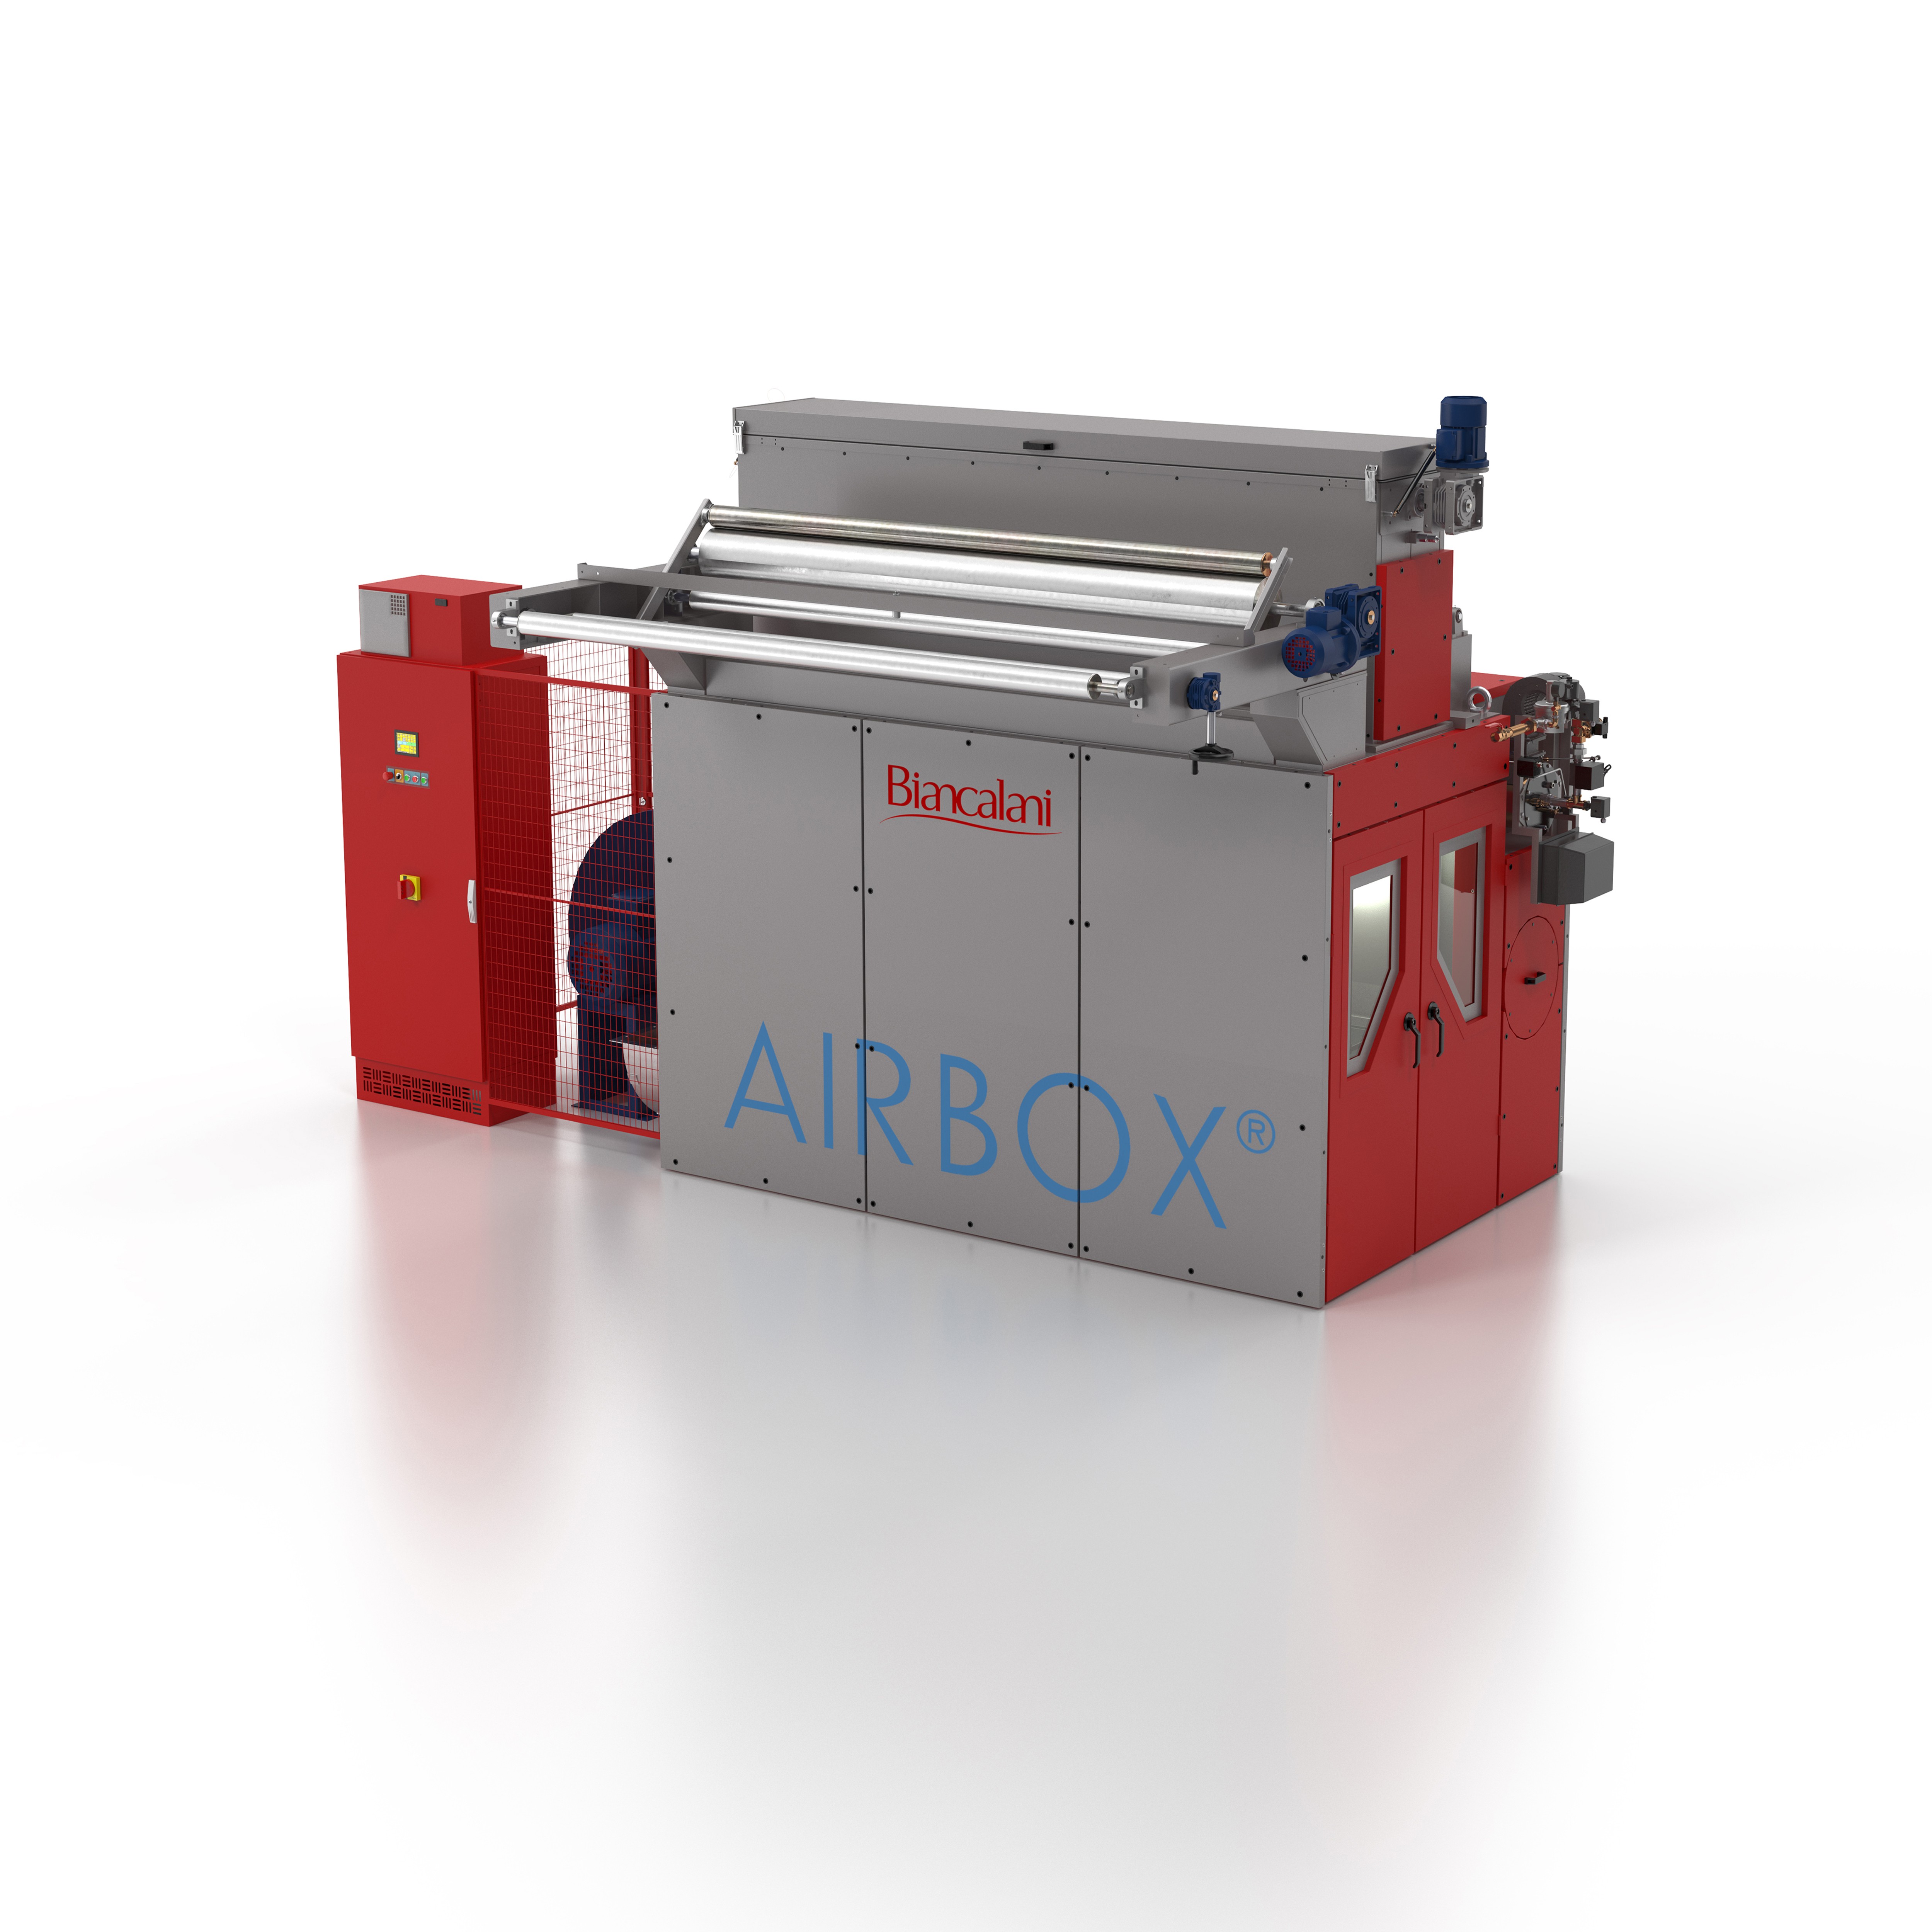 AIRBOX - Your ultimate production line upgrading. Plus, a bet.